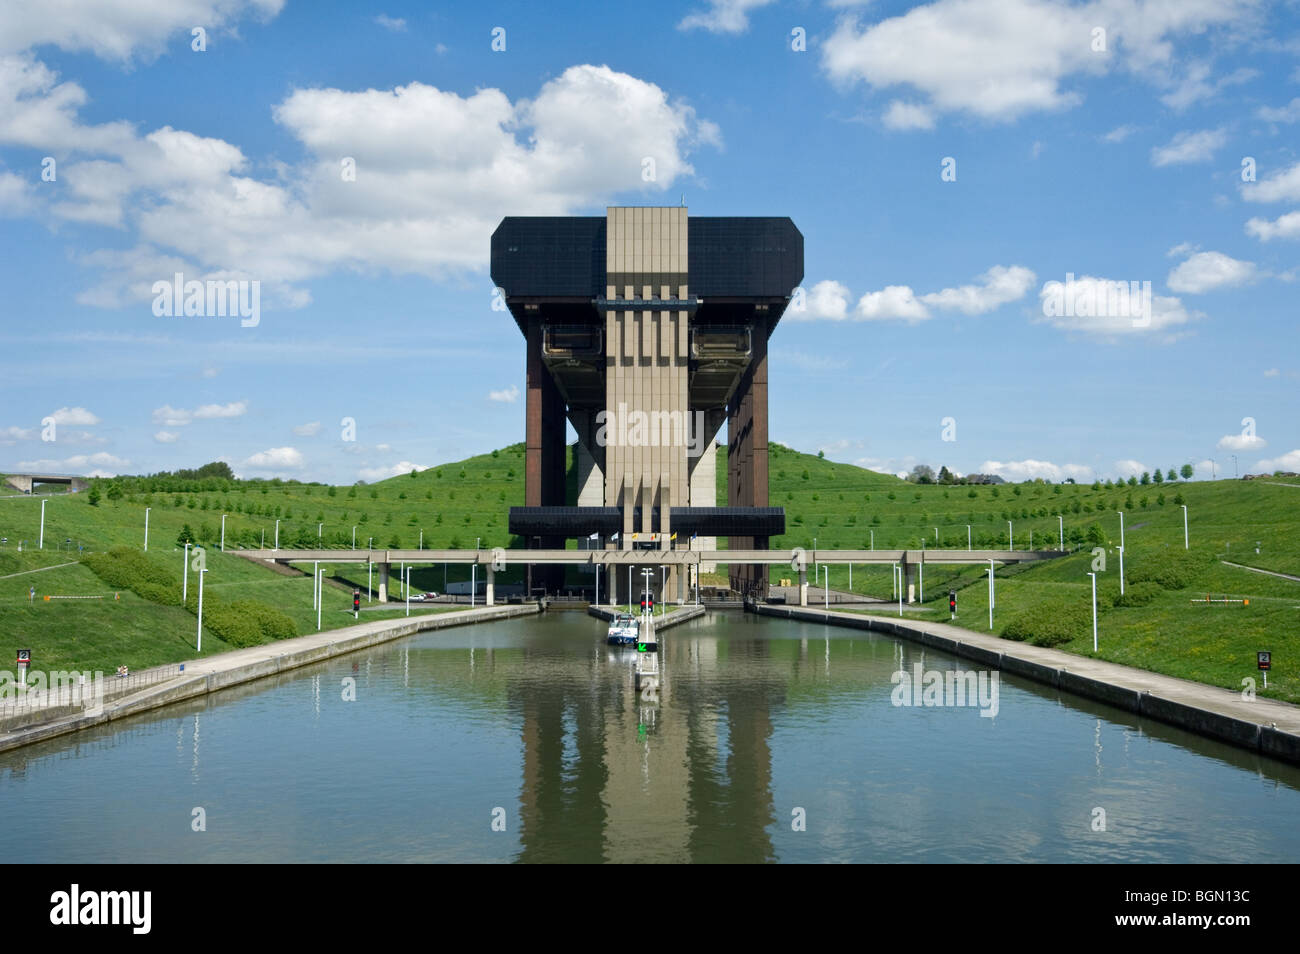 Strépy-Thieu, tallest boat lift in the world, at the Canal du Centre, Le Rœulx, Hainaut, Belgium Stock Photo